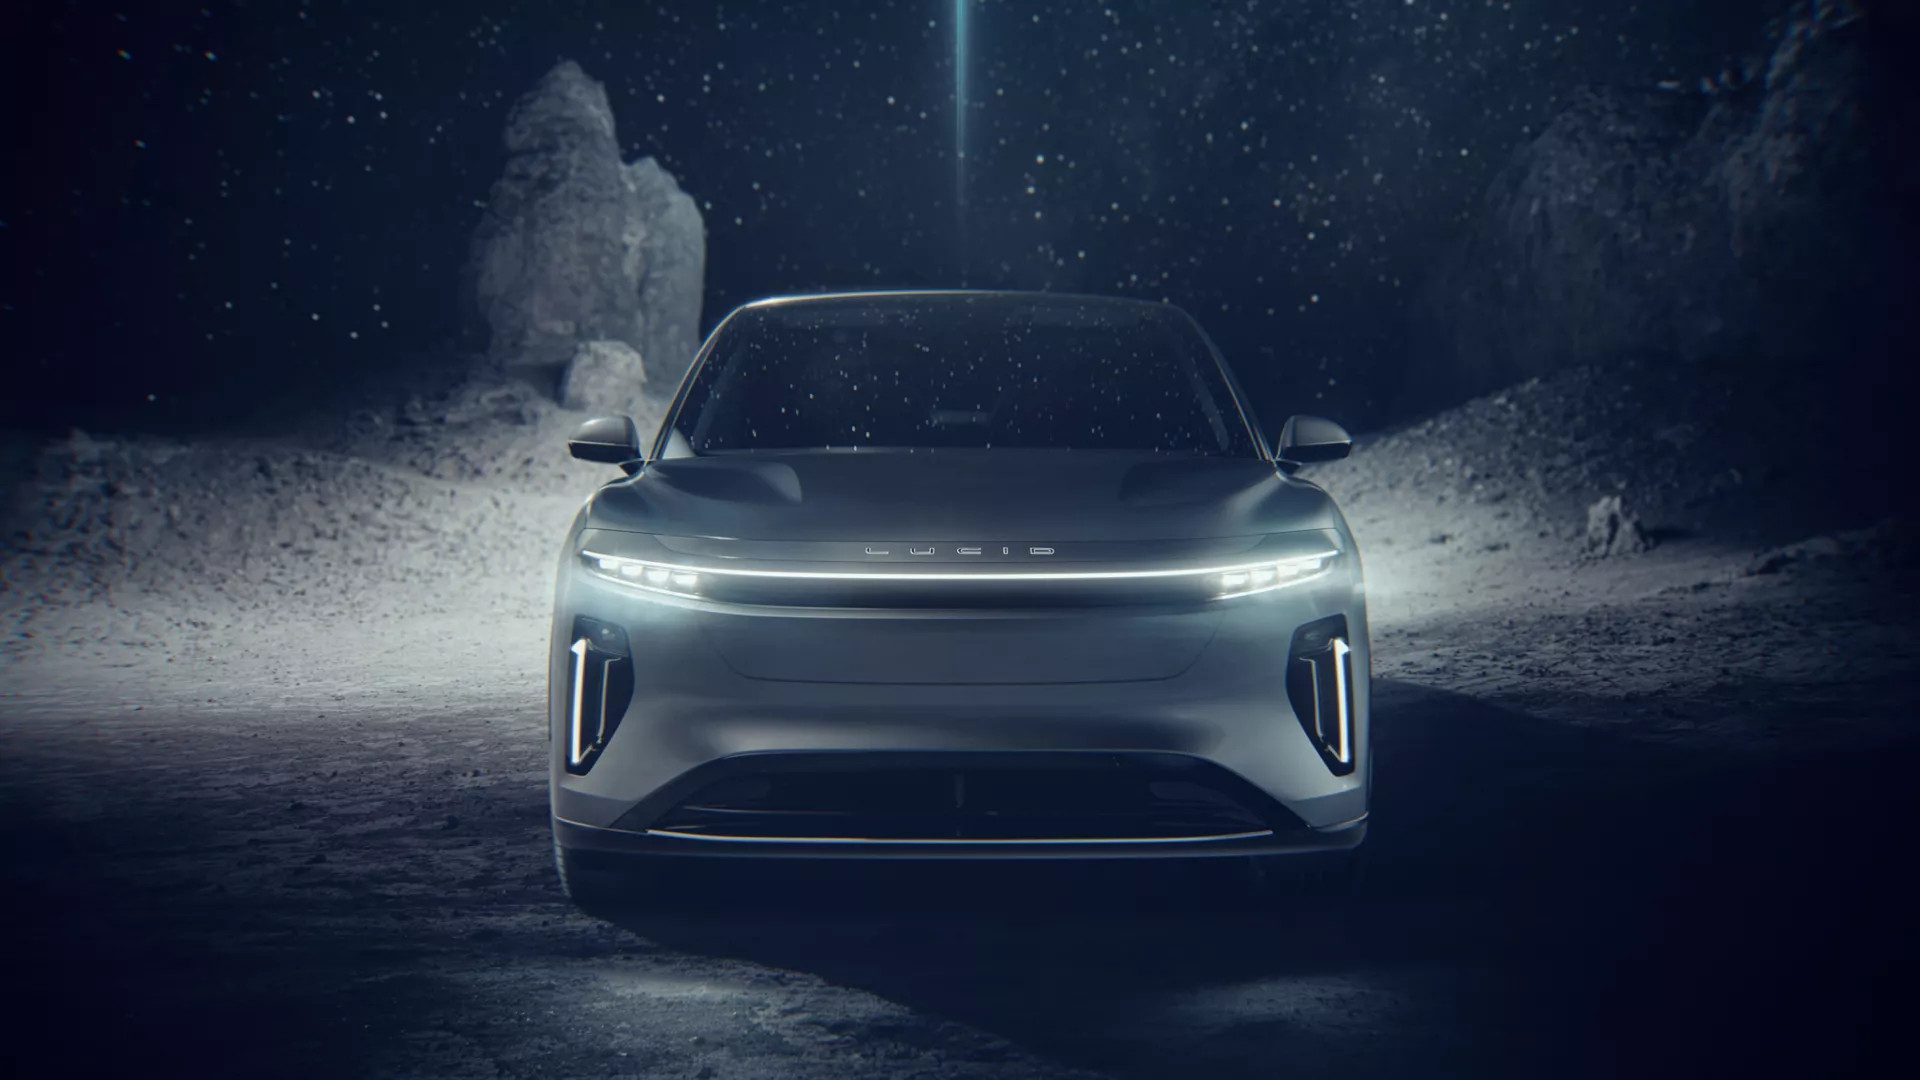 Lucid Gravity SUV Will Debut in November But Still a Year Away From Sales